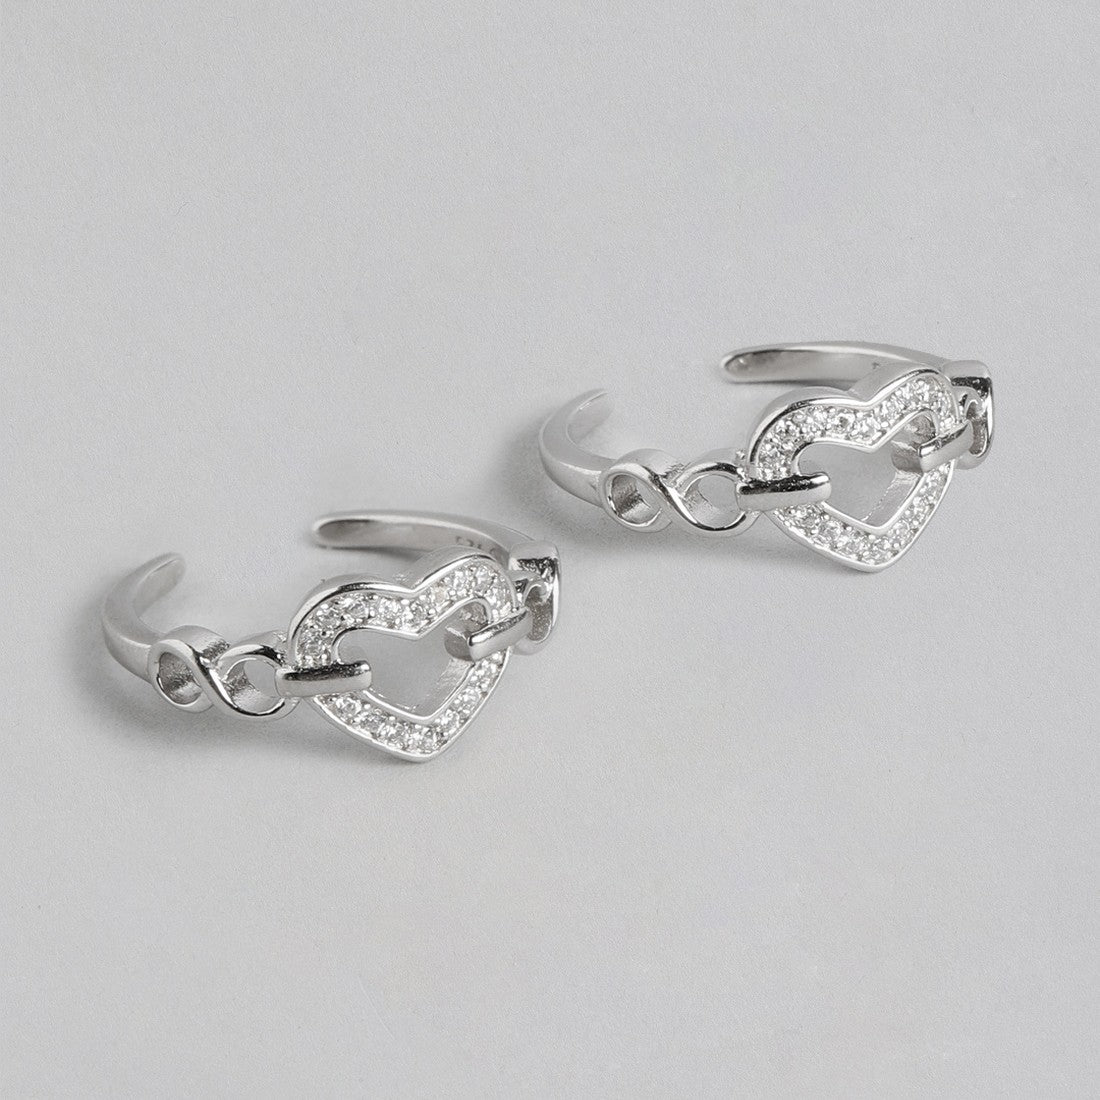 Infinity Heart Silver 925 Silver Toe Ring